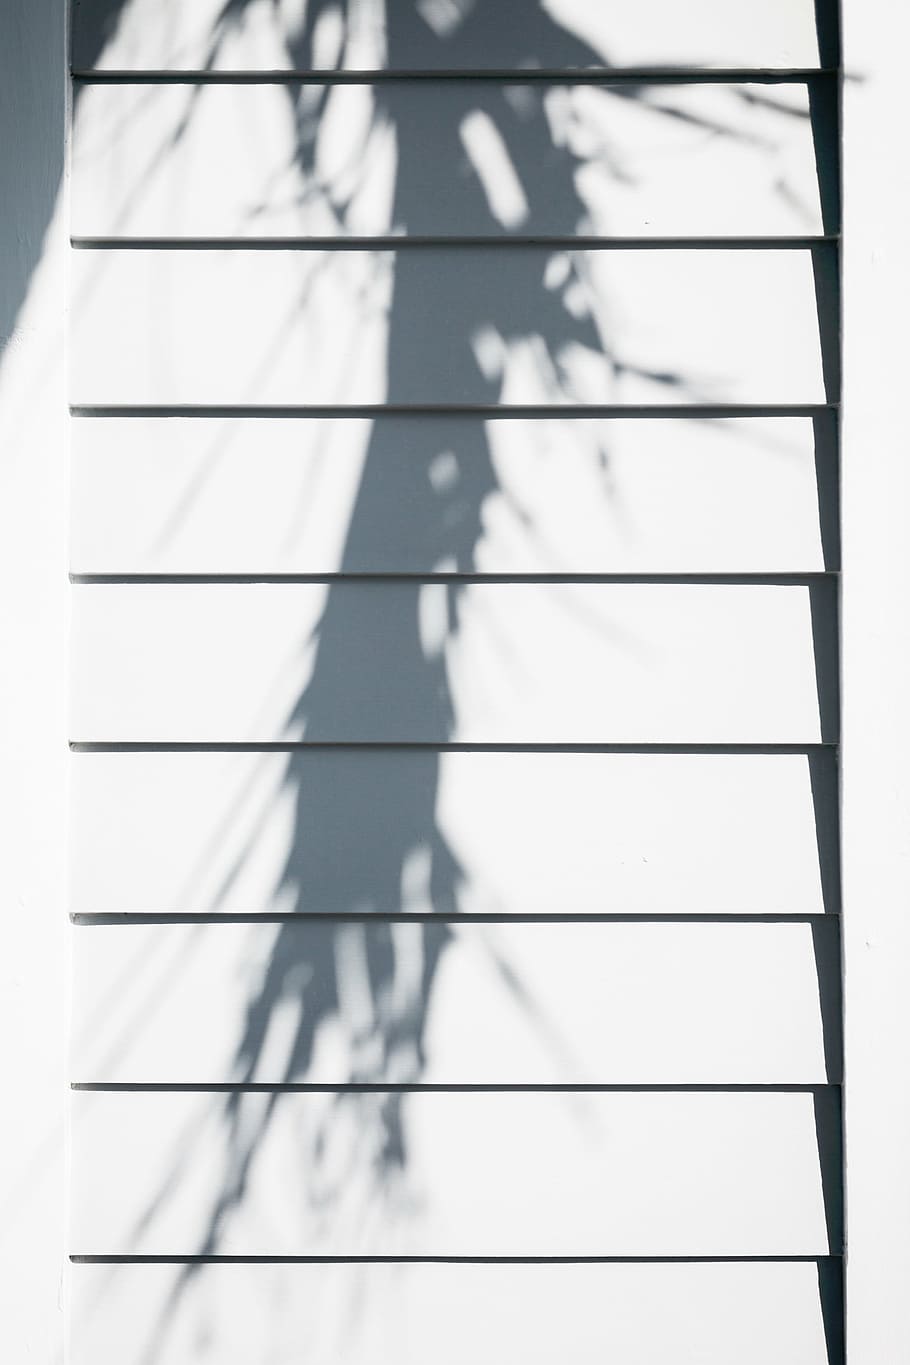 shadow on stairs, window, wood, white, shadow, house, home, day, sunlight, built structure